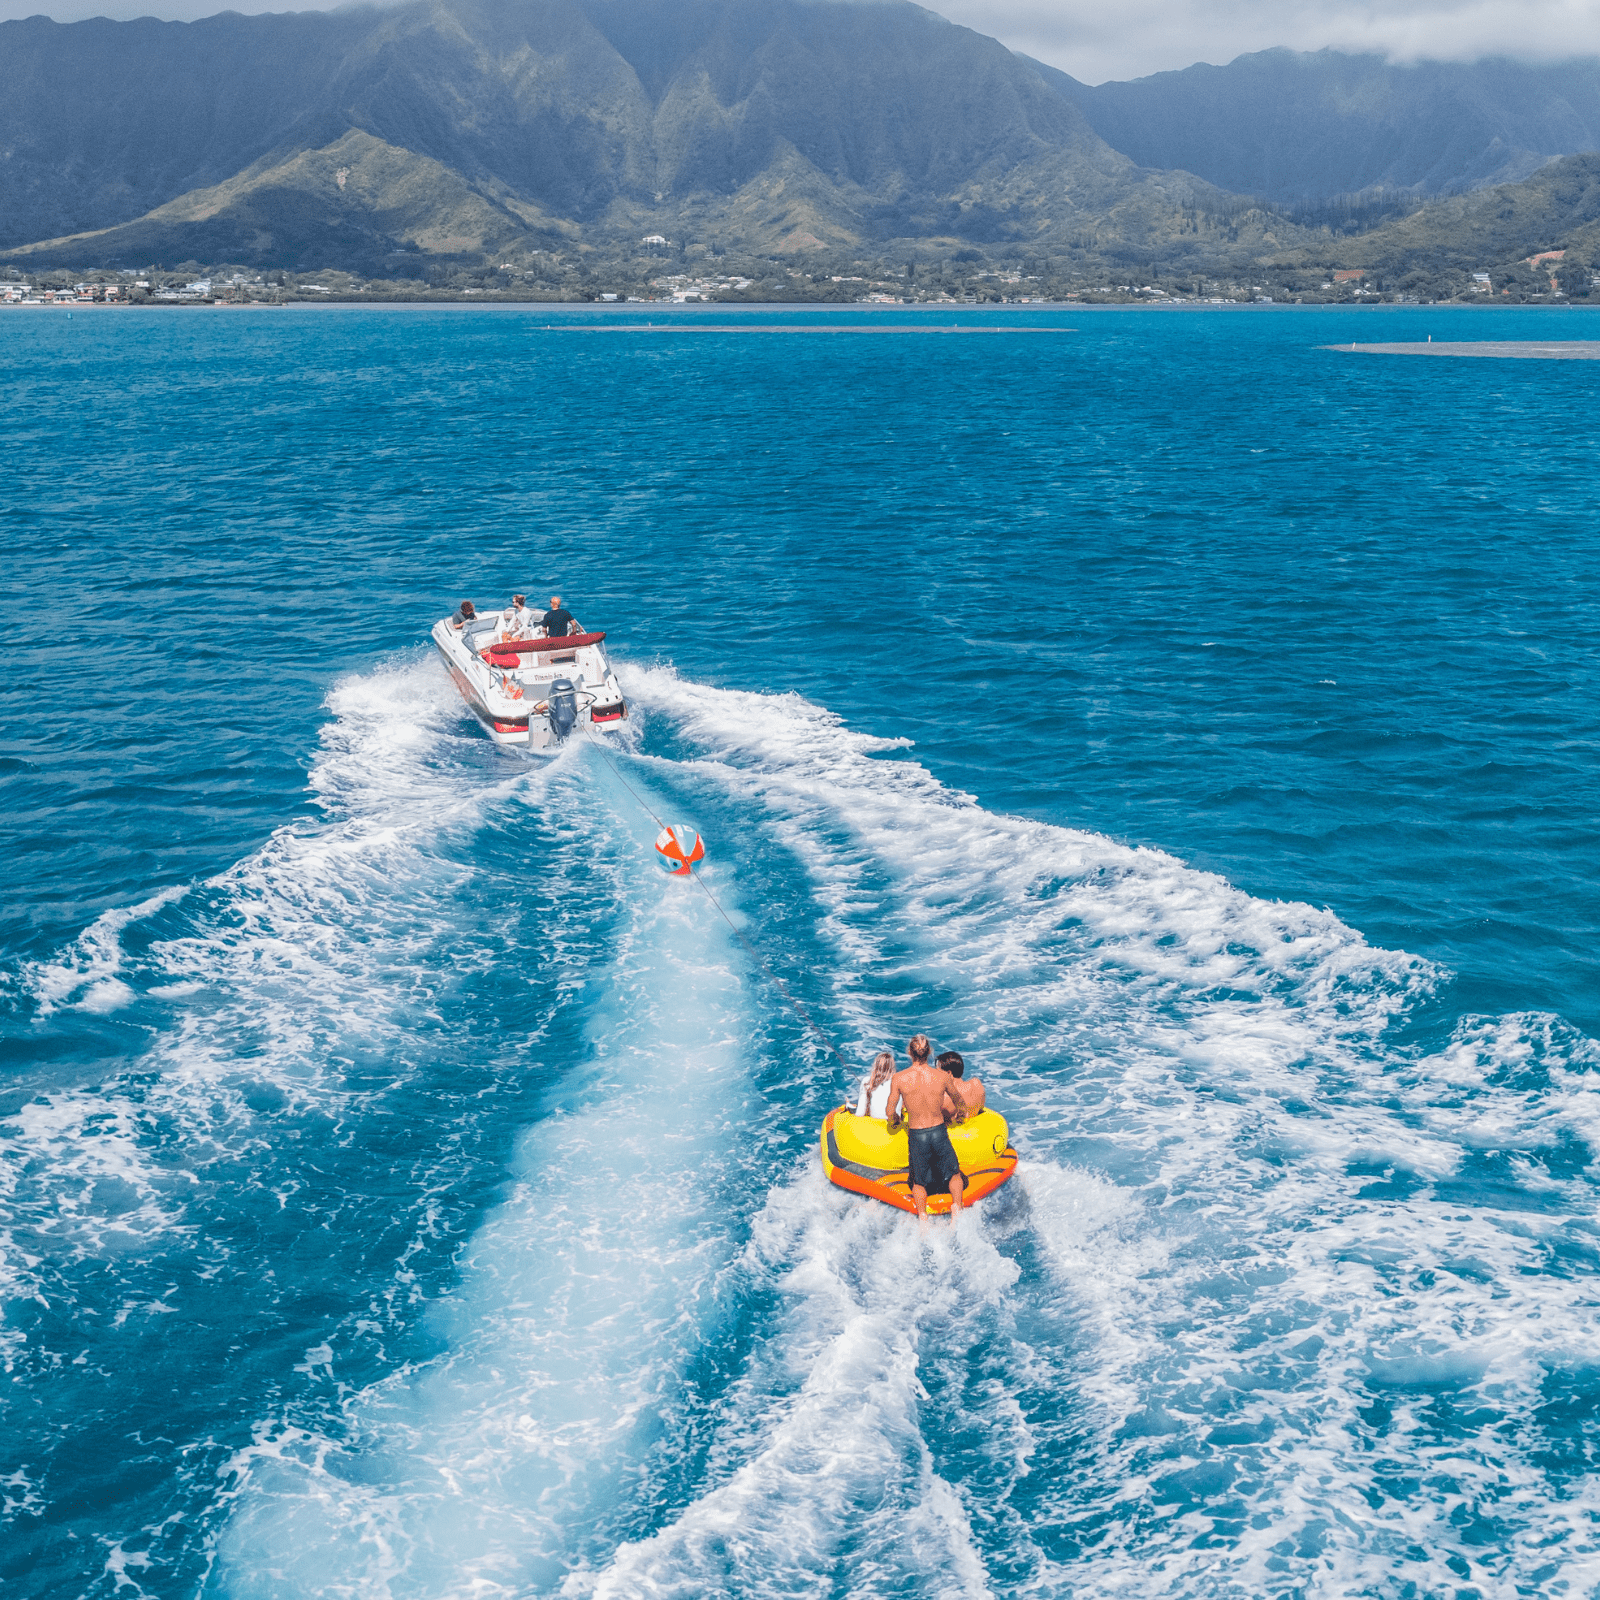 Oahu3 Towable Tube for Boating, 1-3 Rider